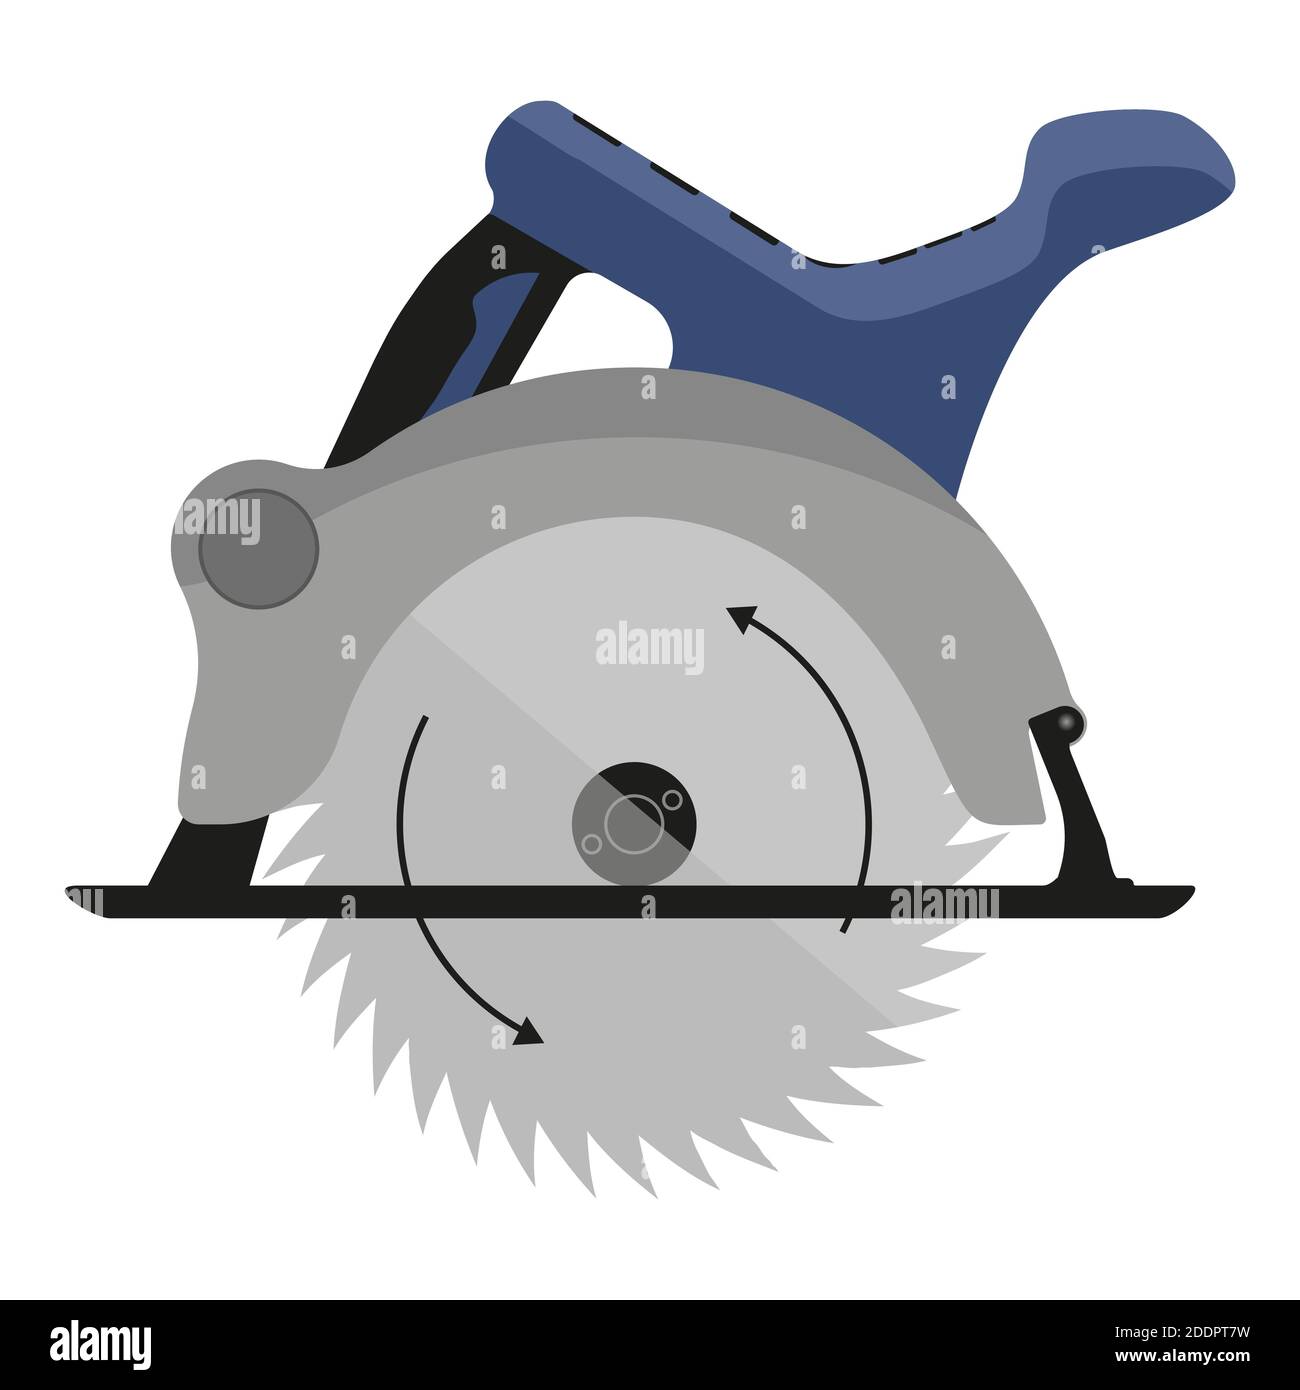 Electric circular saw with steel disk gears isolated on white background. Electric hand tools for cutting wood or metal. Logo design template. Vector Stock Vector